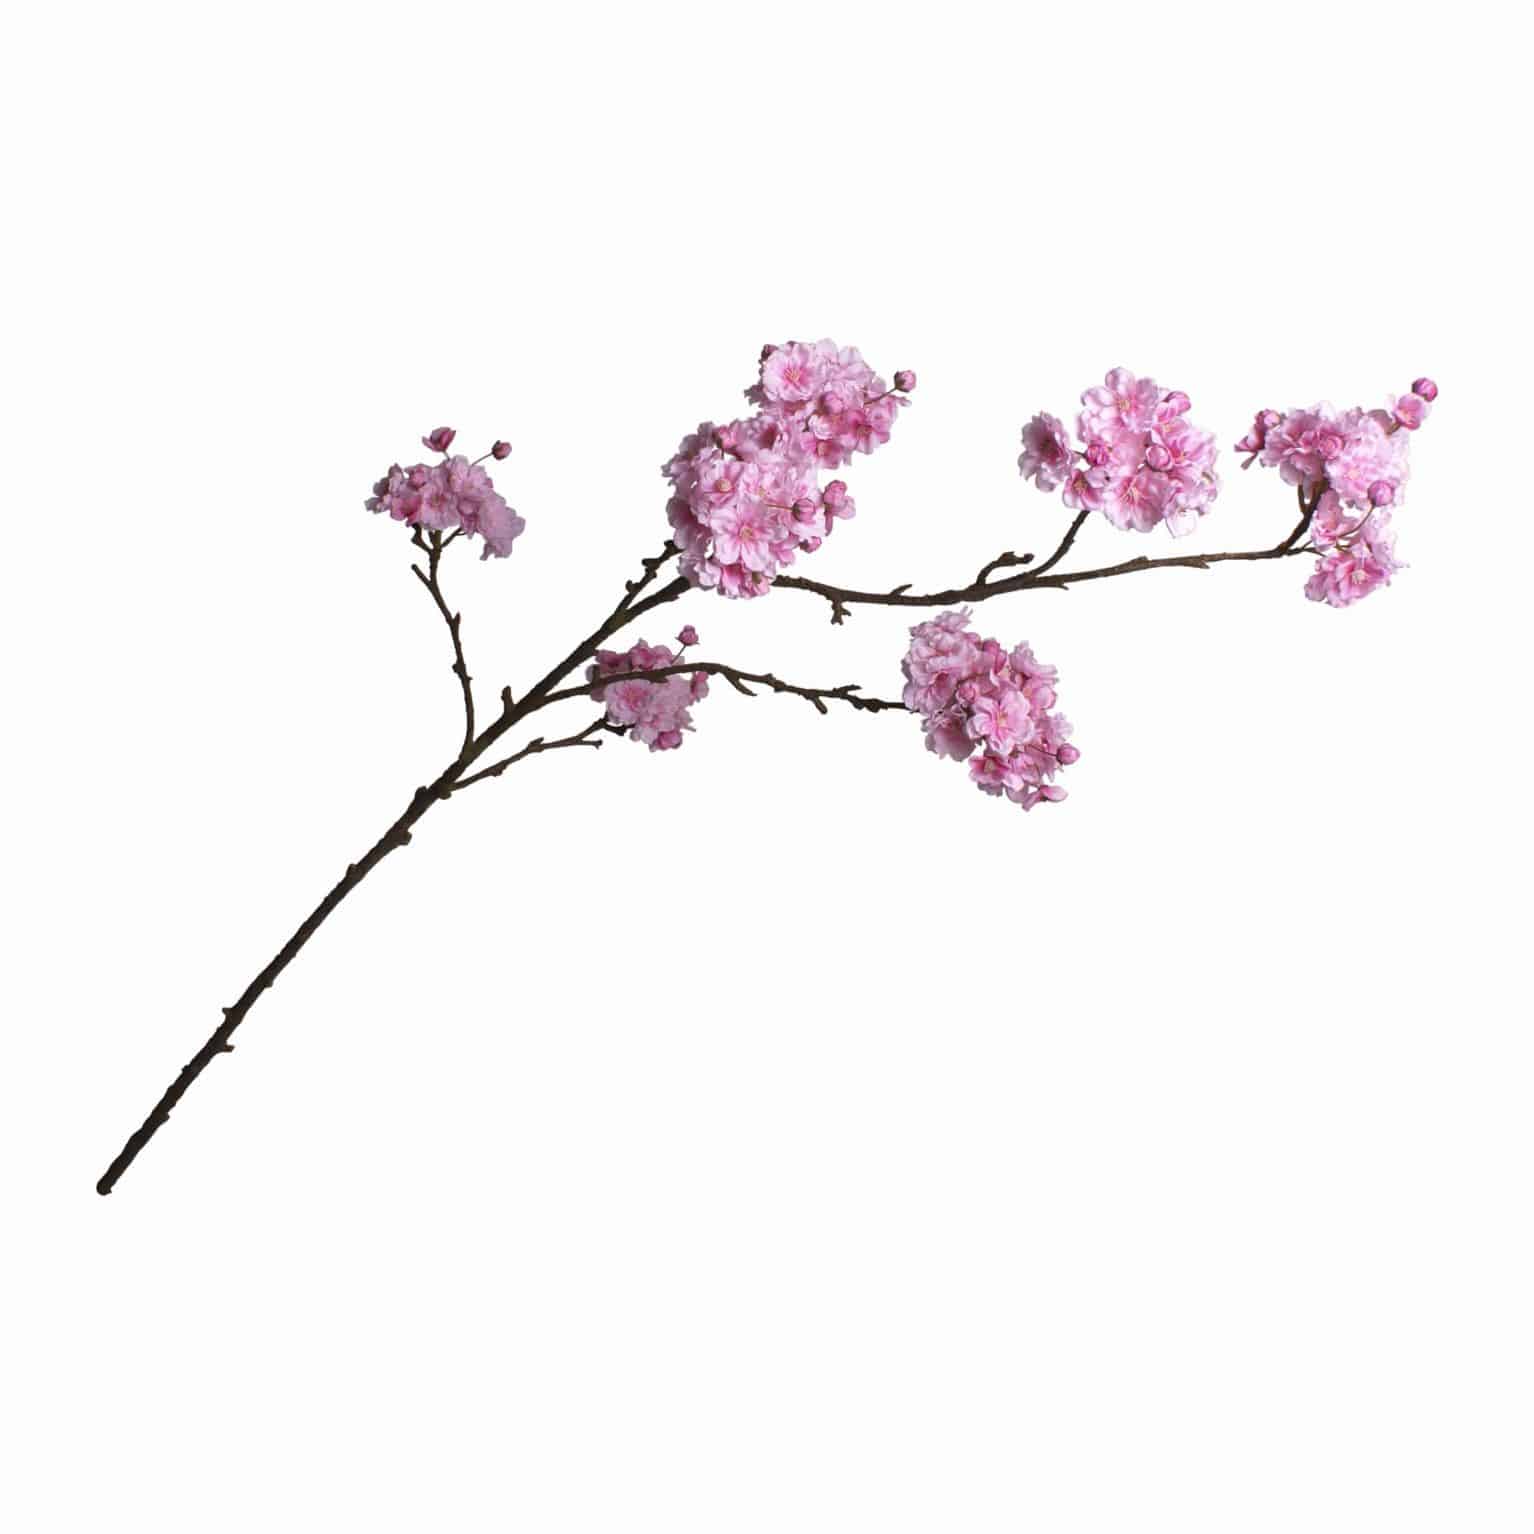 Shop for the best artificial flowers. This faux cherry blossom spray stem is an exceptional match of fresh. Versatile to use in many kinds of flower arrangement.